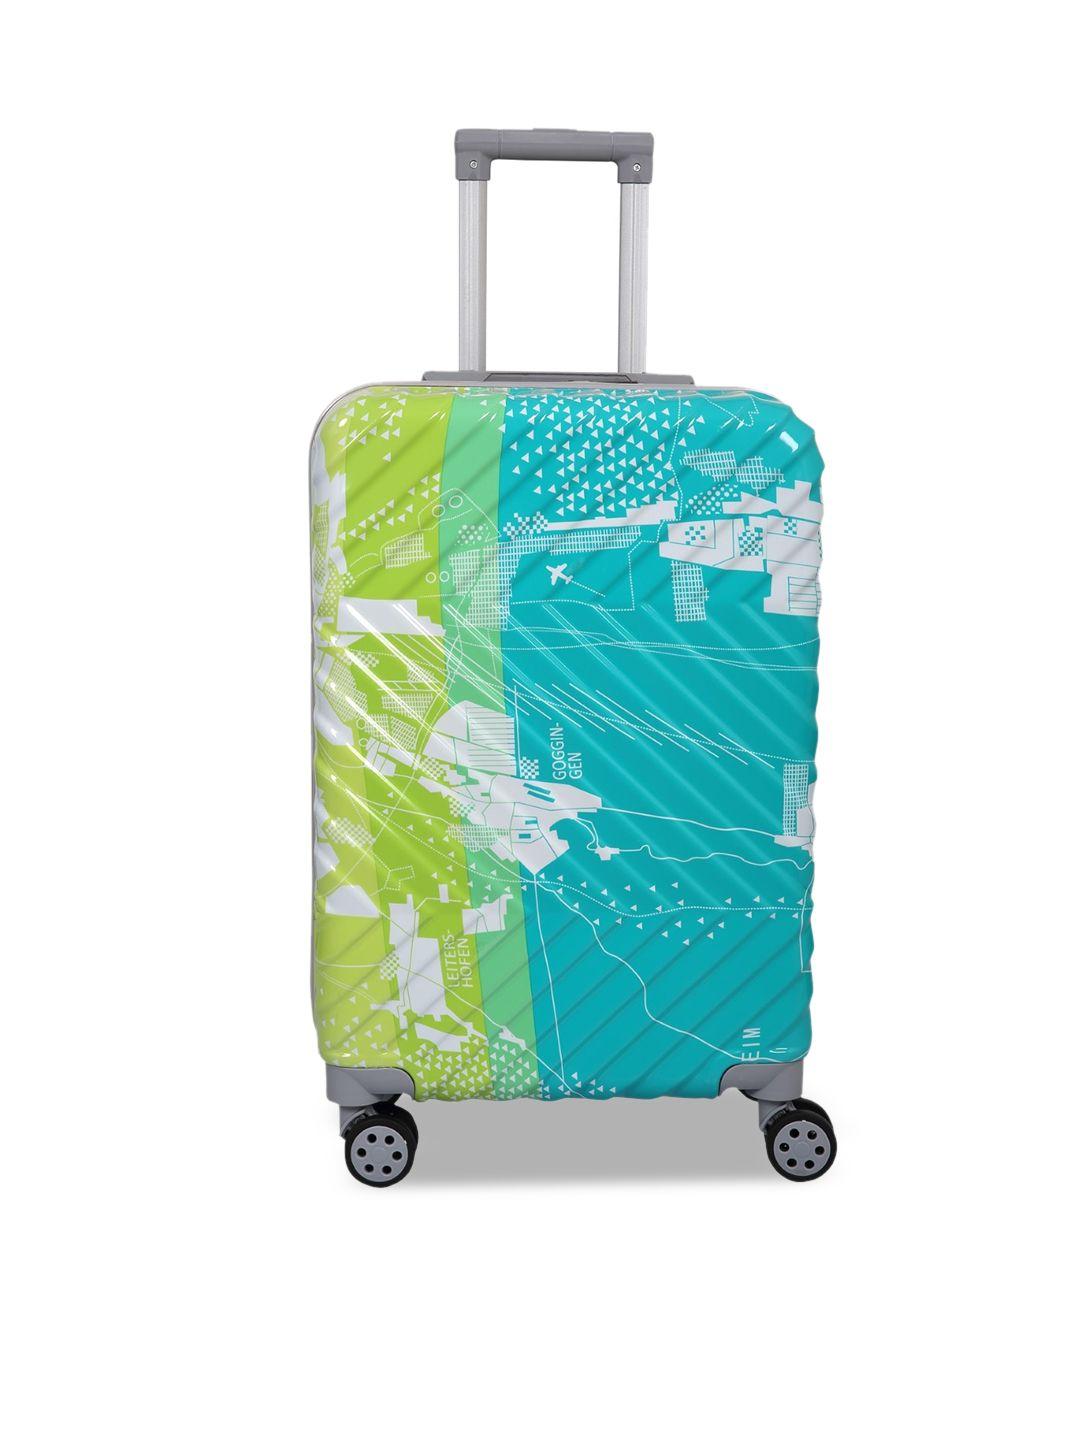 polo class green & turquoise blue printed trolley bag 50 l